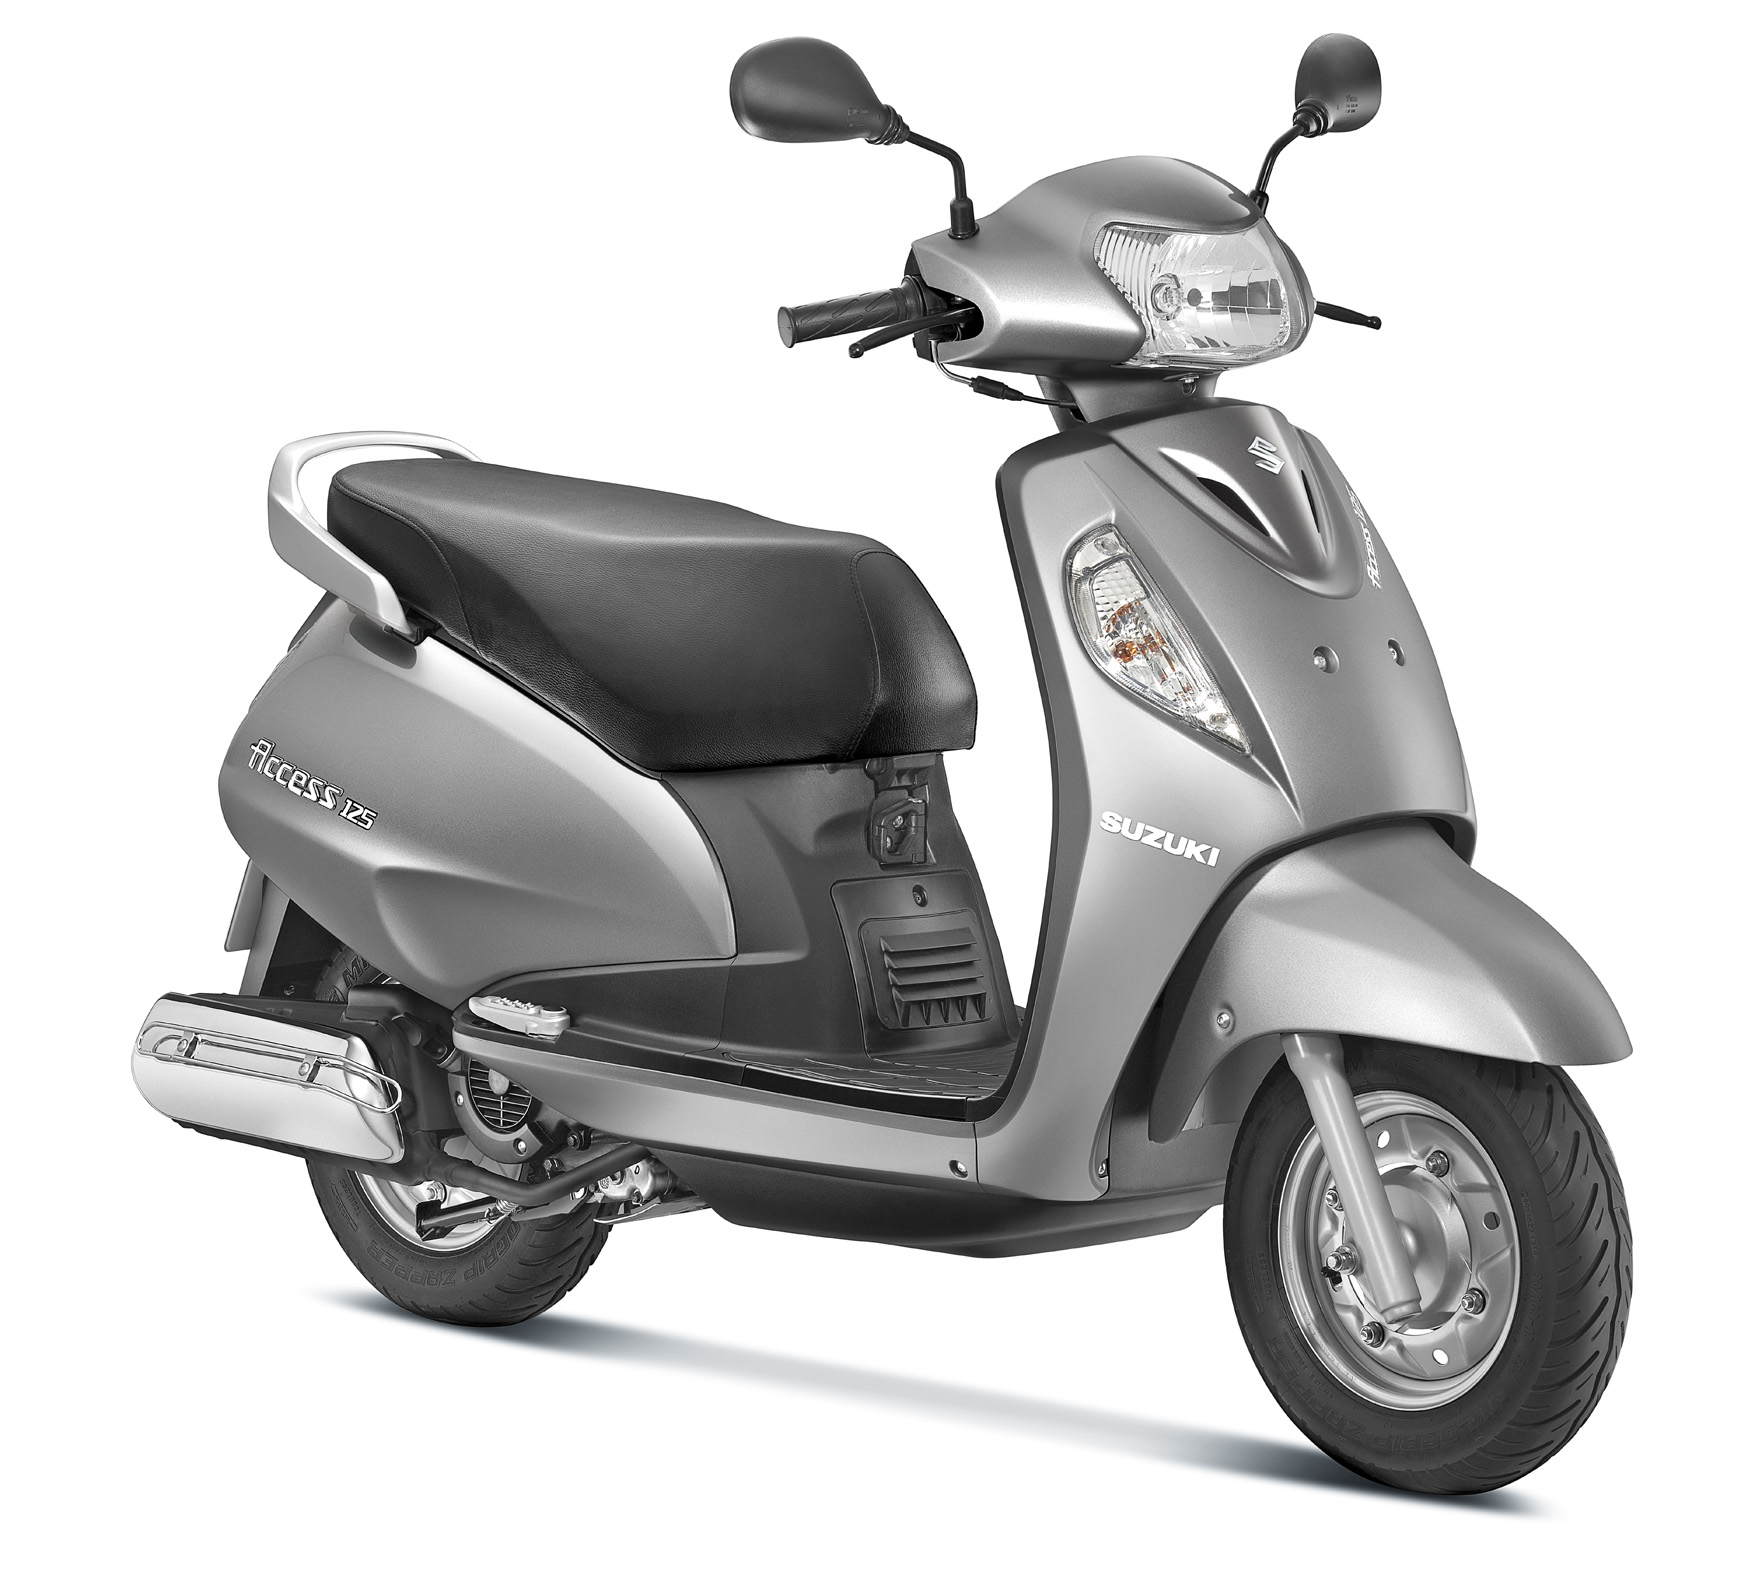 Suzuki Access refreshed, available for Rs. 53,223